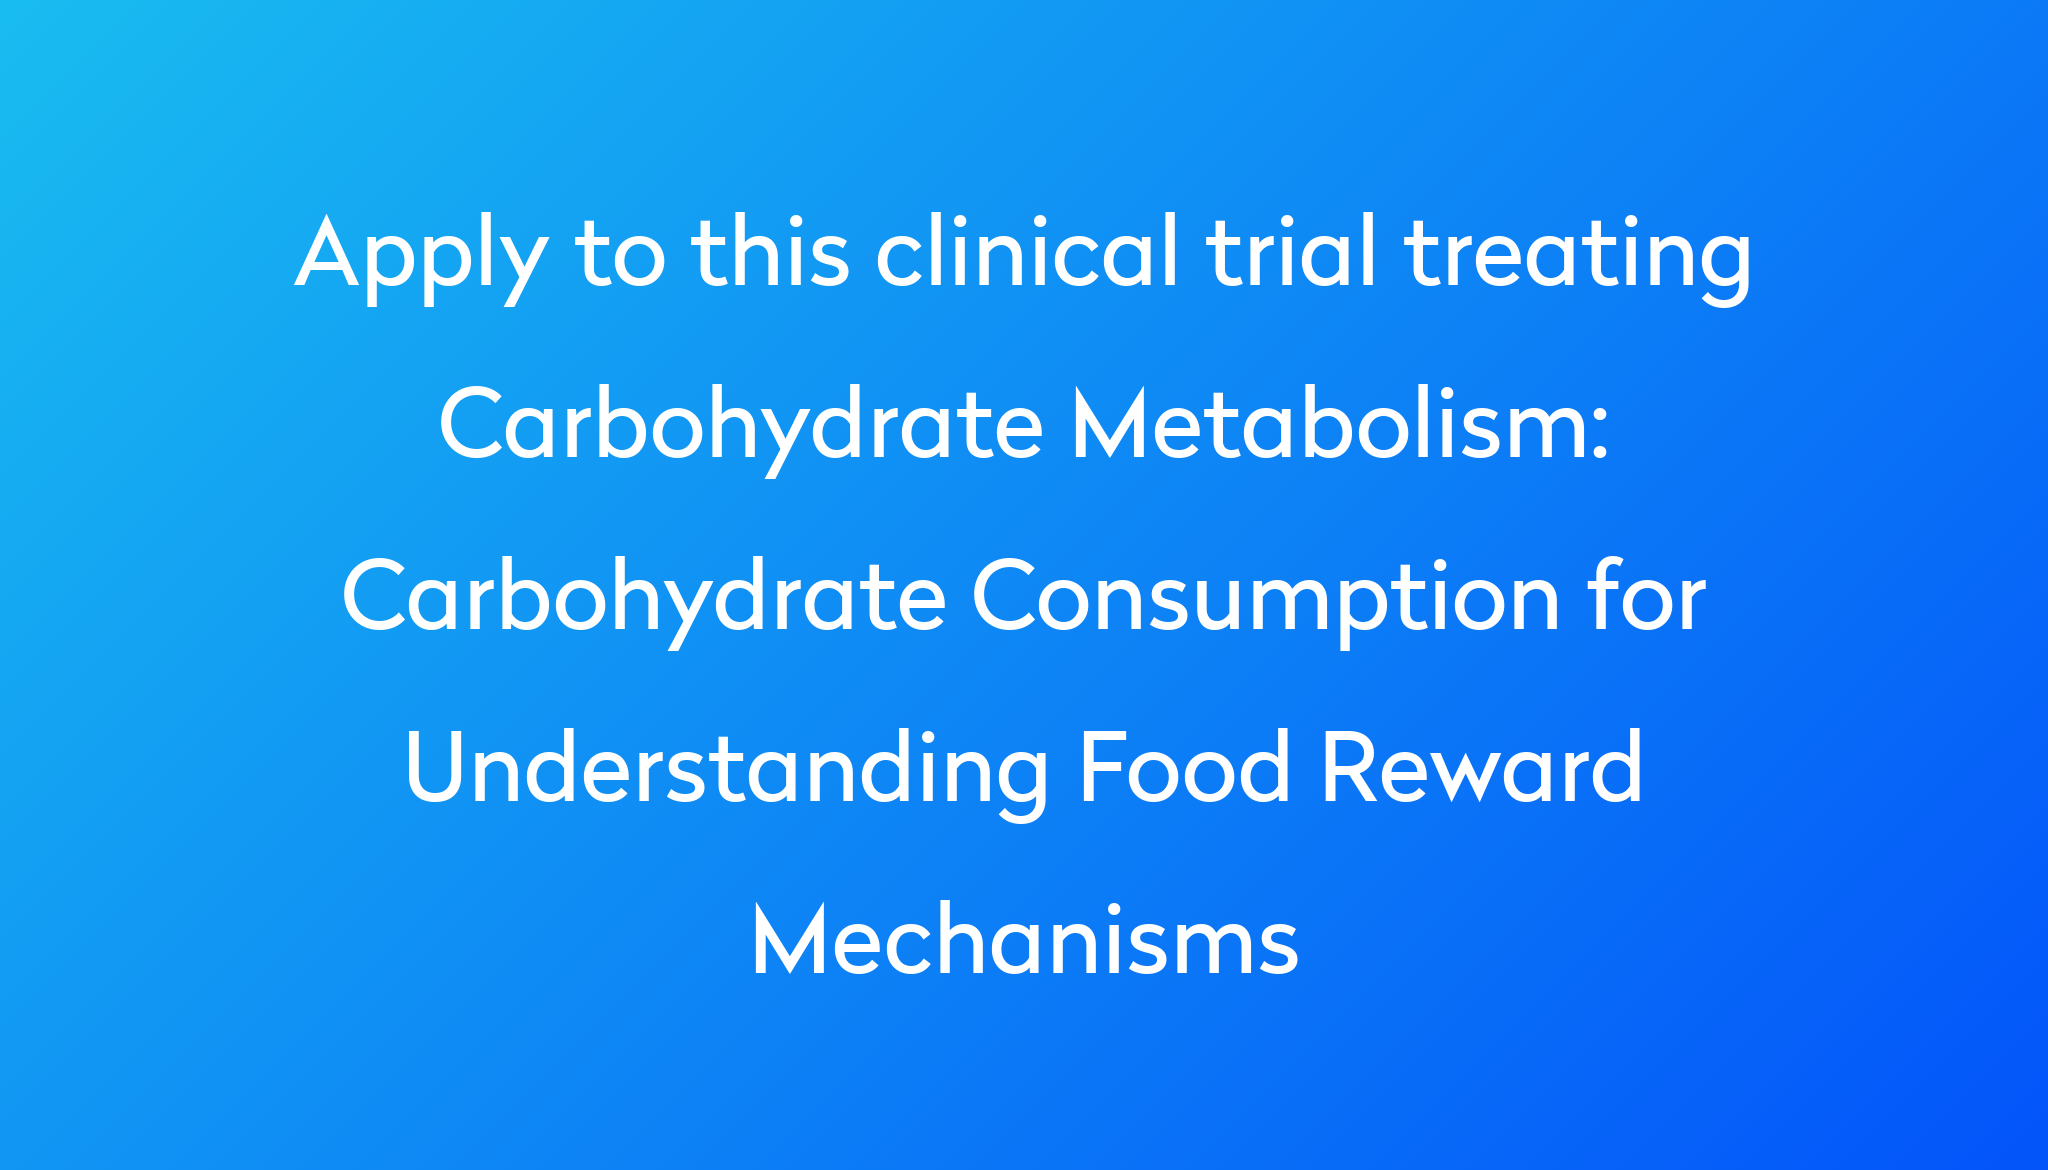 Carbohydrate Consumption for Understanding Food Reward Mechanisms